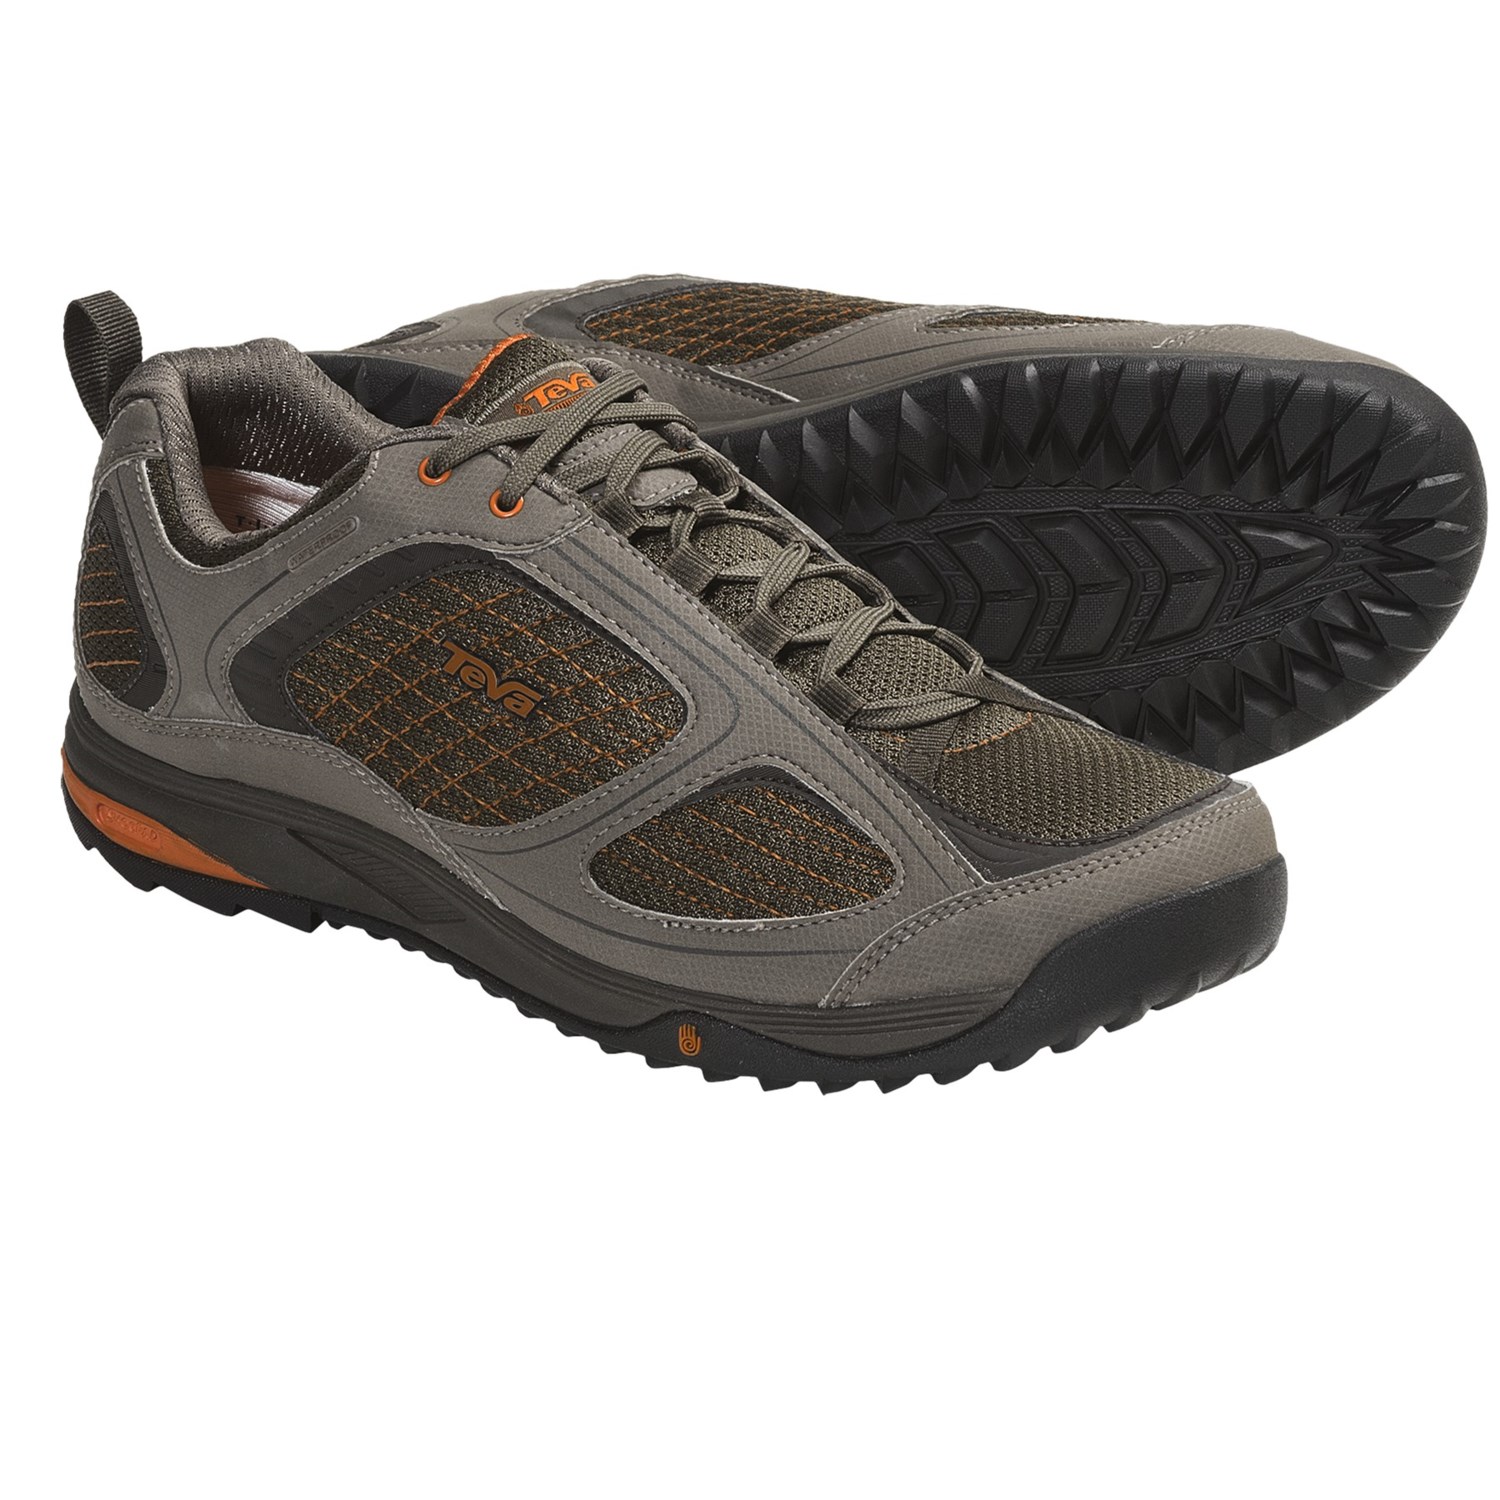 Teva Royal Arch Shoes - Waterproof (For Men) in Bungee Cord